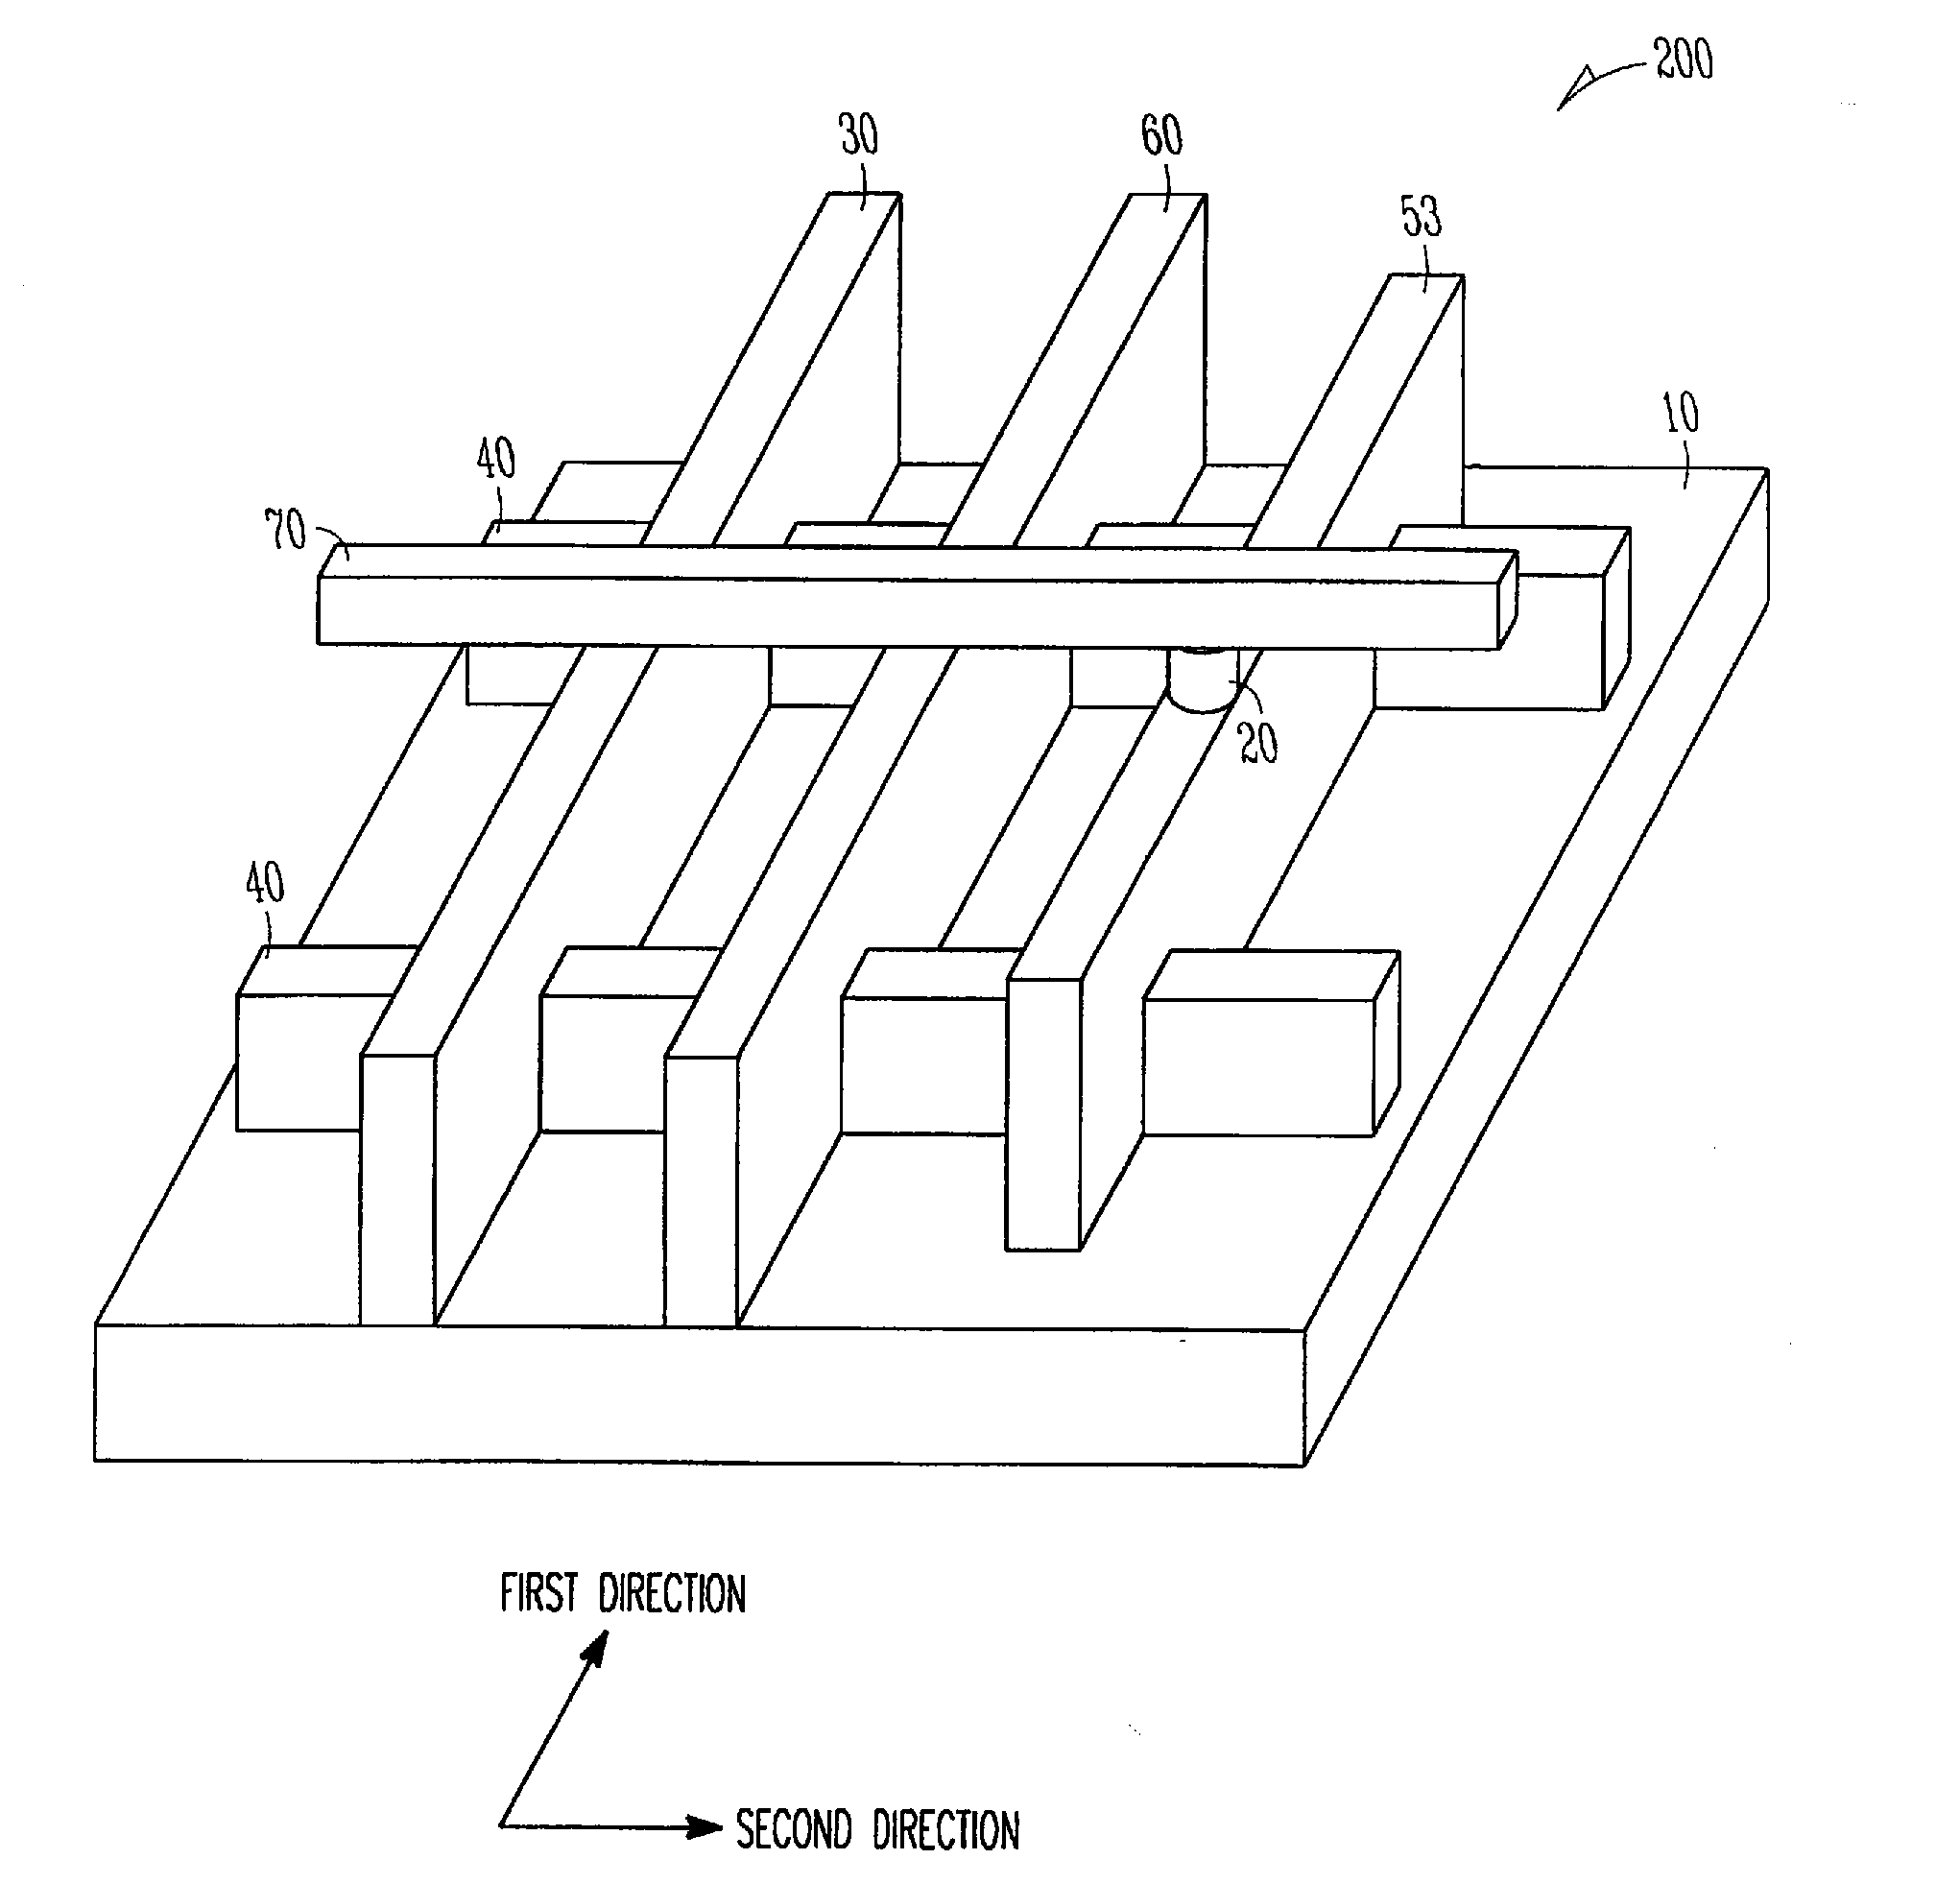 Apparatus of memory array using finfets